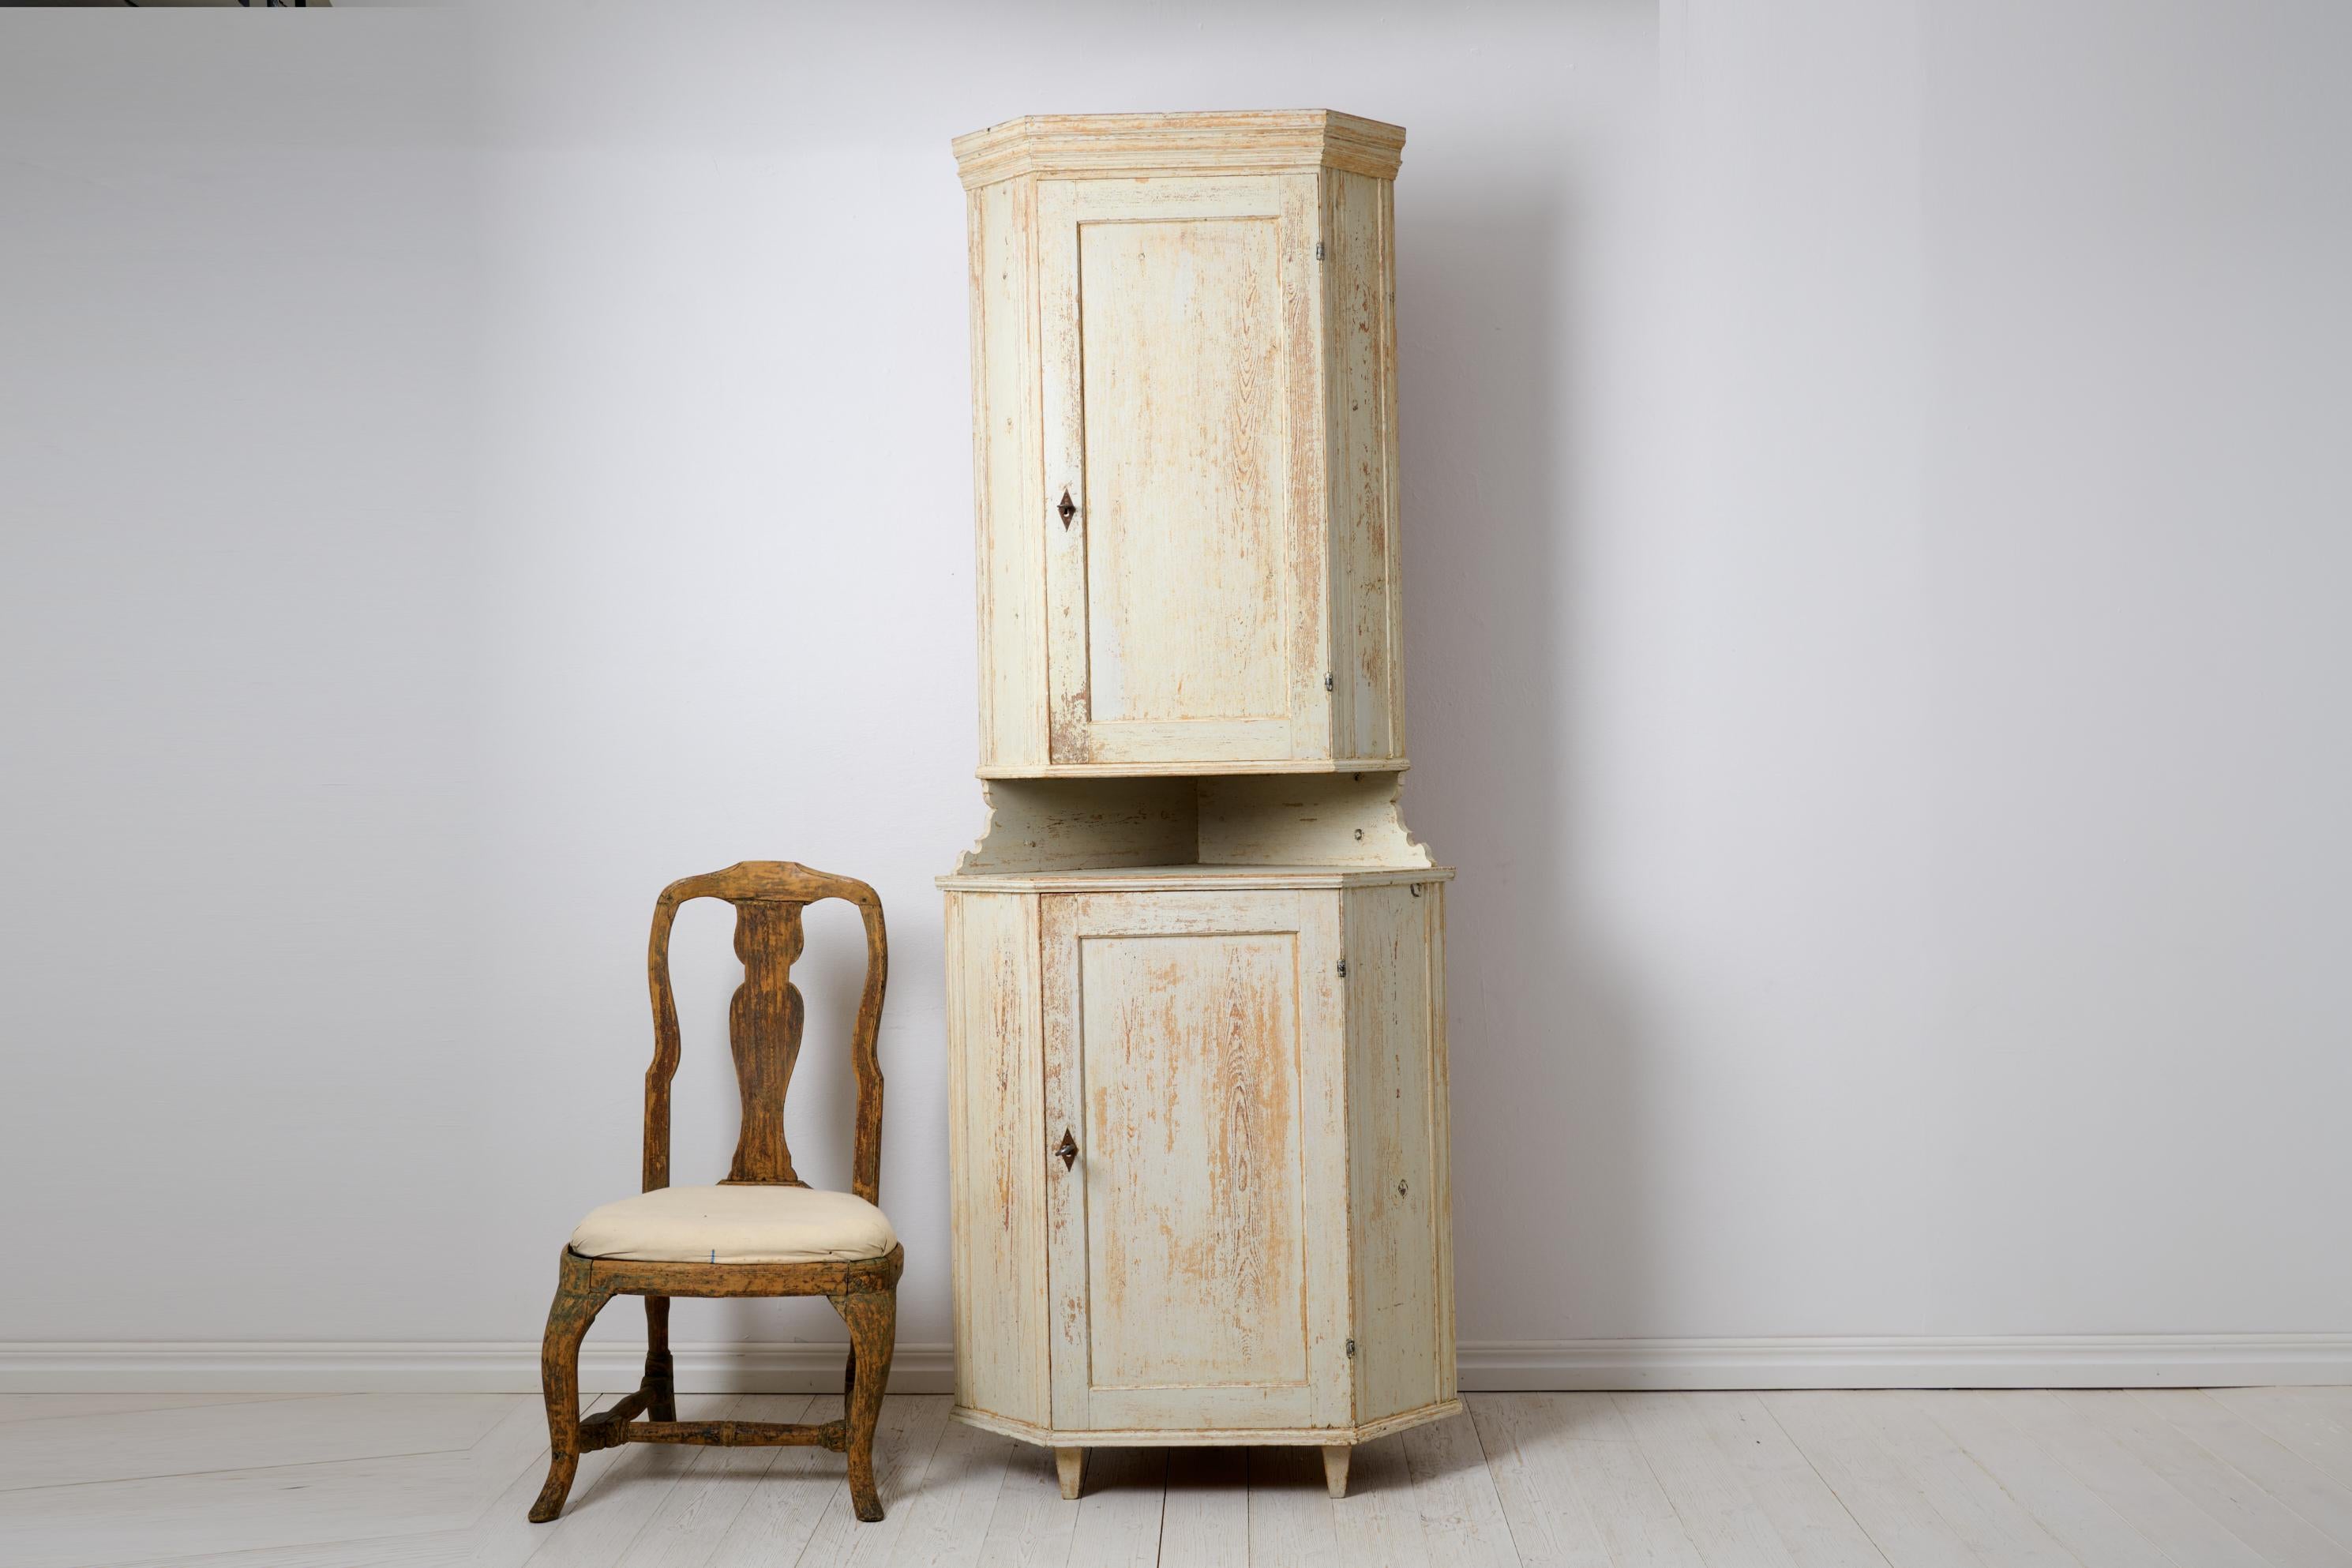 Antique country corner cabinet in gustavian style from northern Sweden. The cabinet is made around the 1820s by hand in solid pine. It’s made in two parts with a detachable mid section – see picture. Straight classic shape, healthy and solid frame.